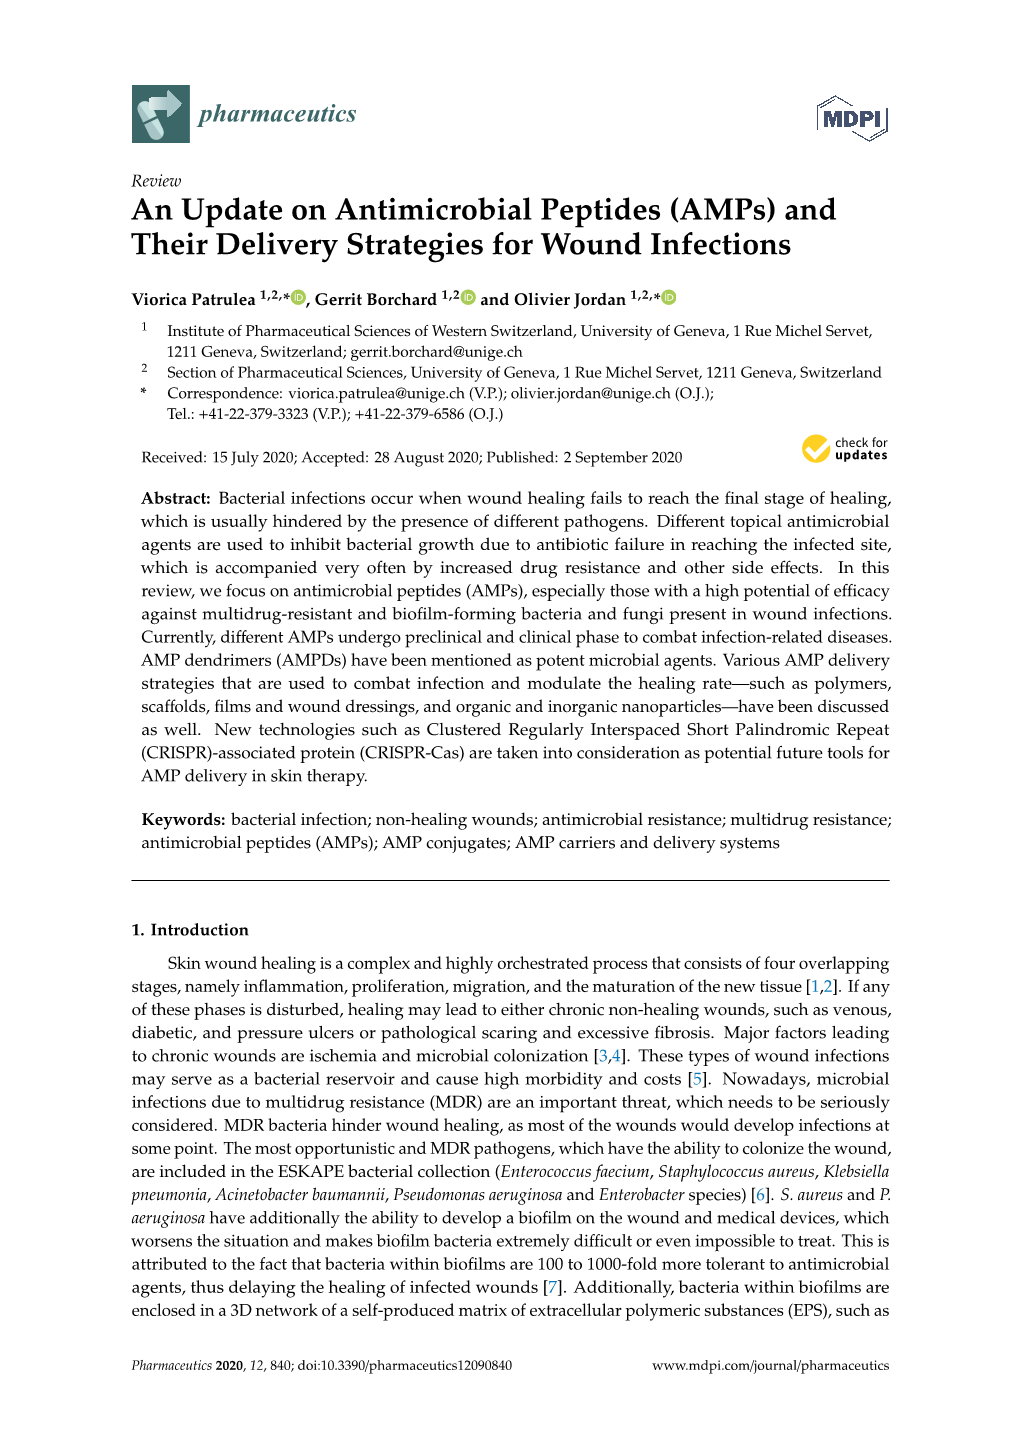 An Update on Antimicrobial Peptides (Amps) and Their Delivery Strategies for Wound Infections